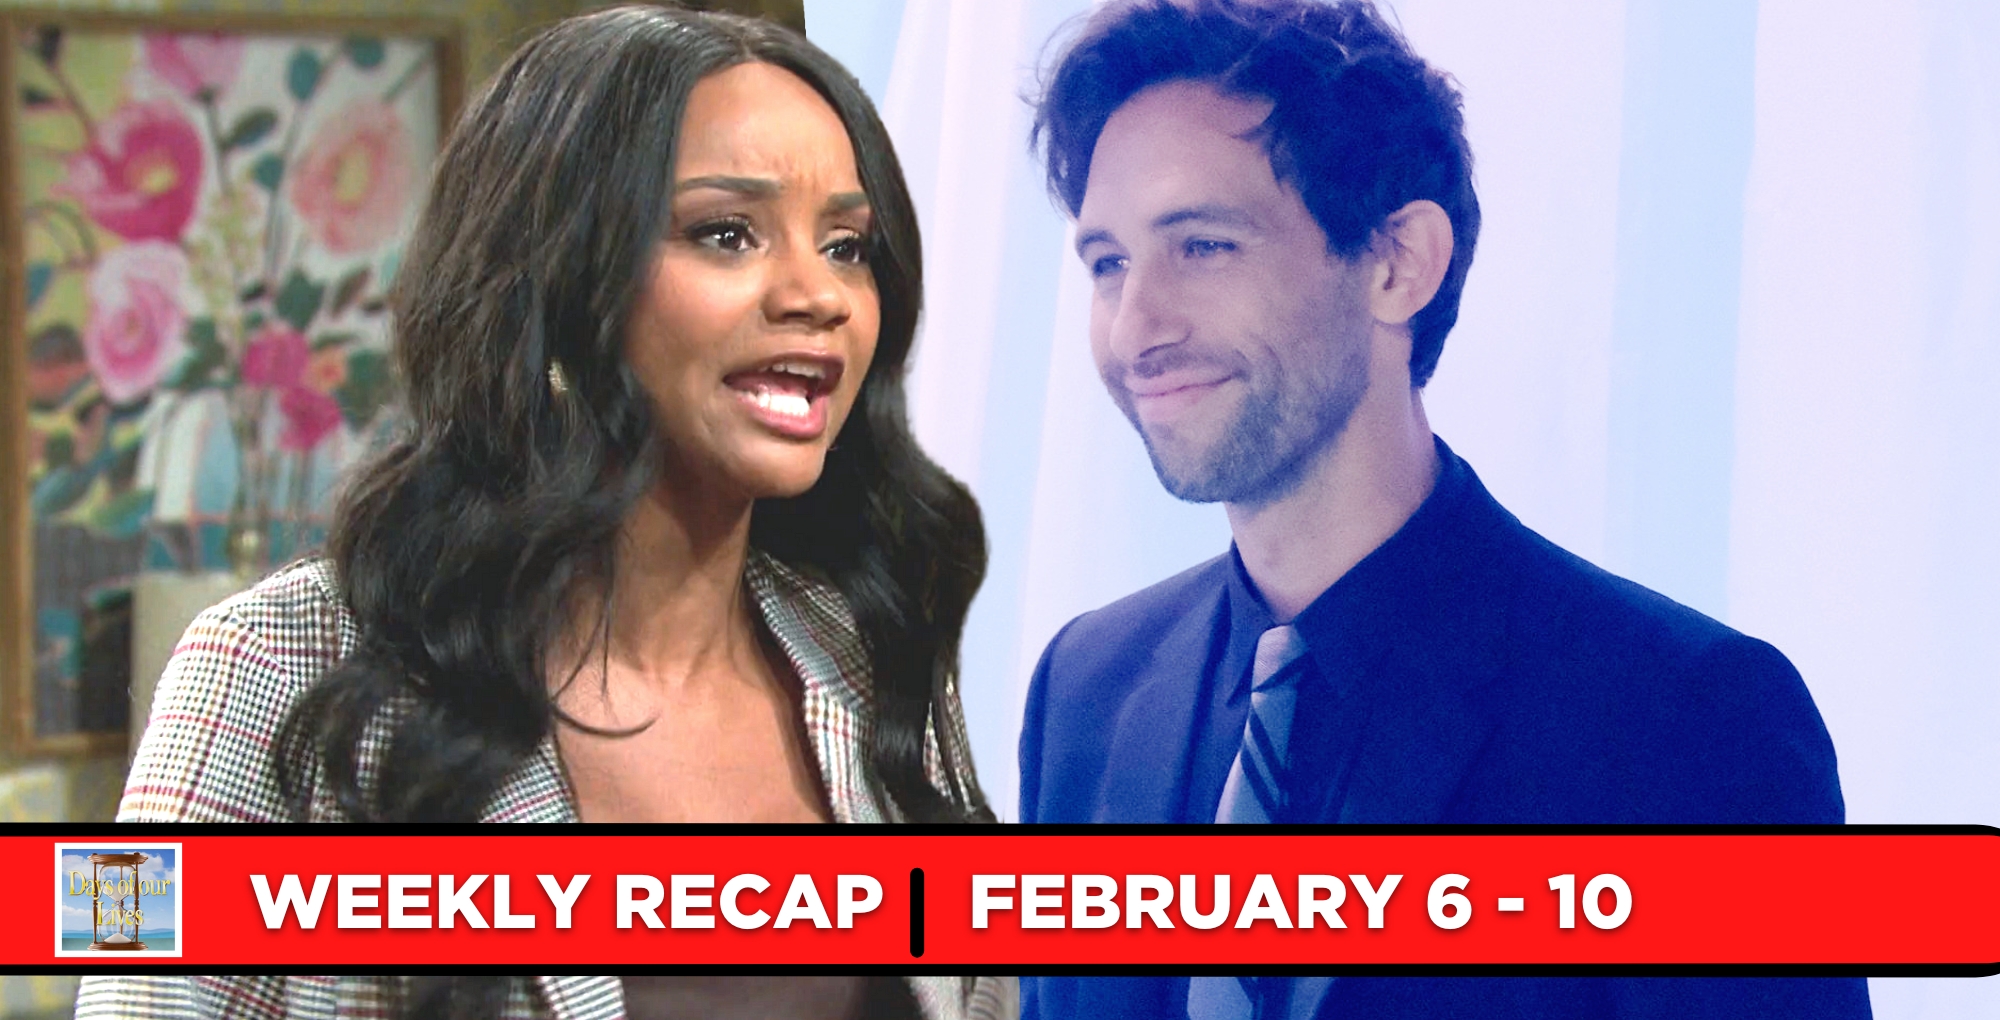 days of our lives recaps for february 6 – february 10, 2023 chanel dupree and nick fallon